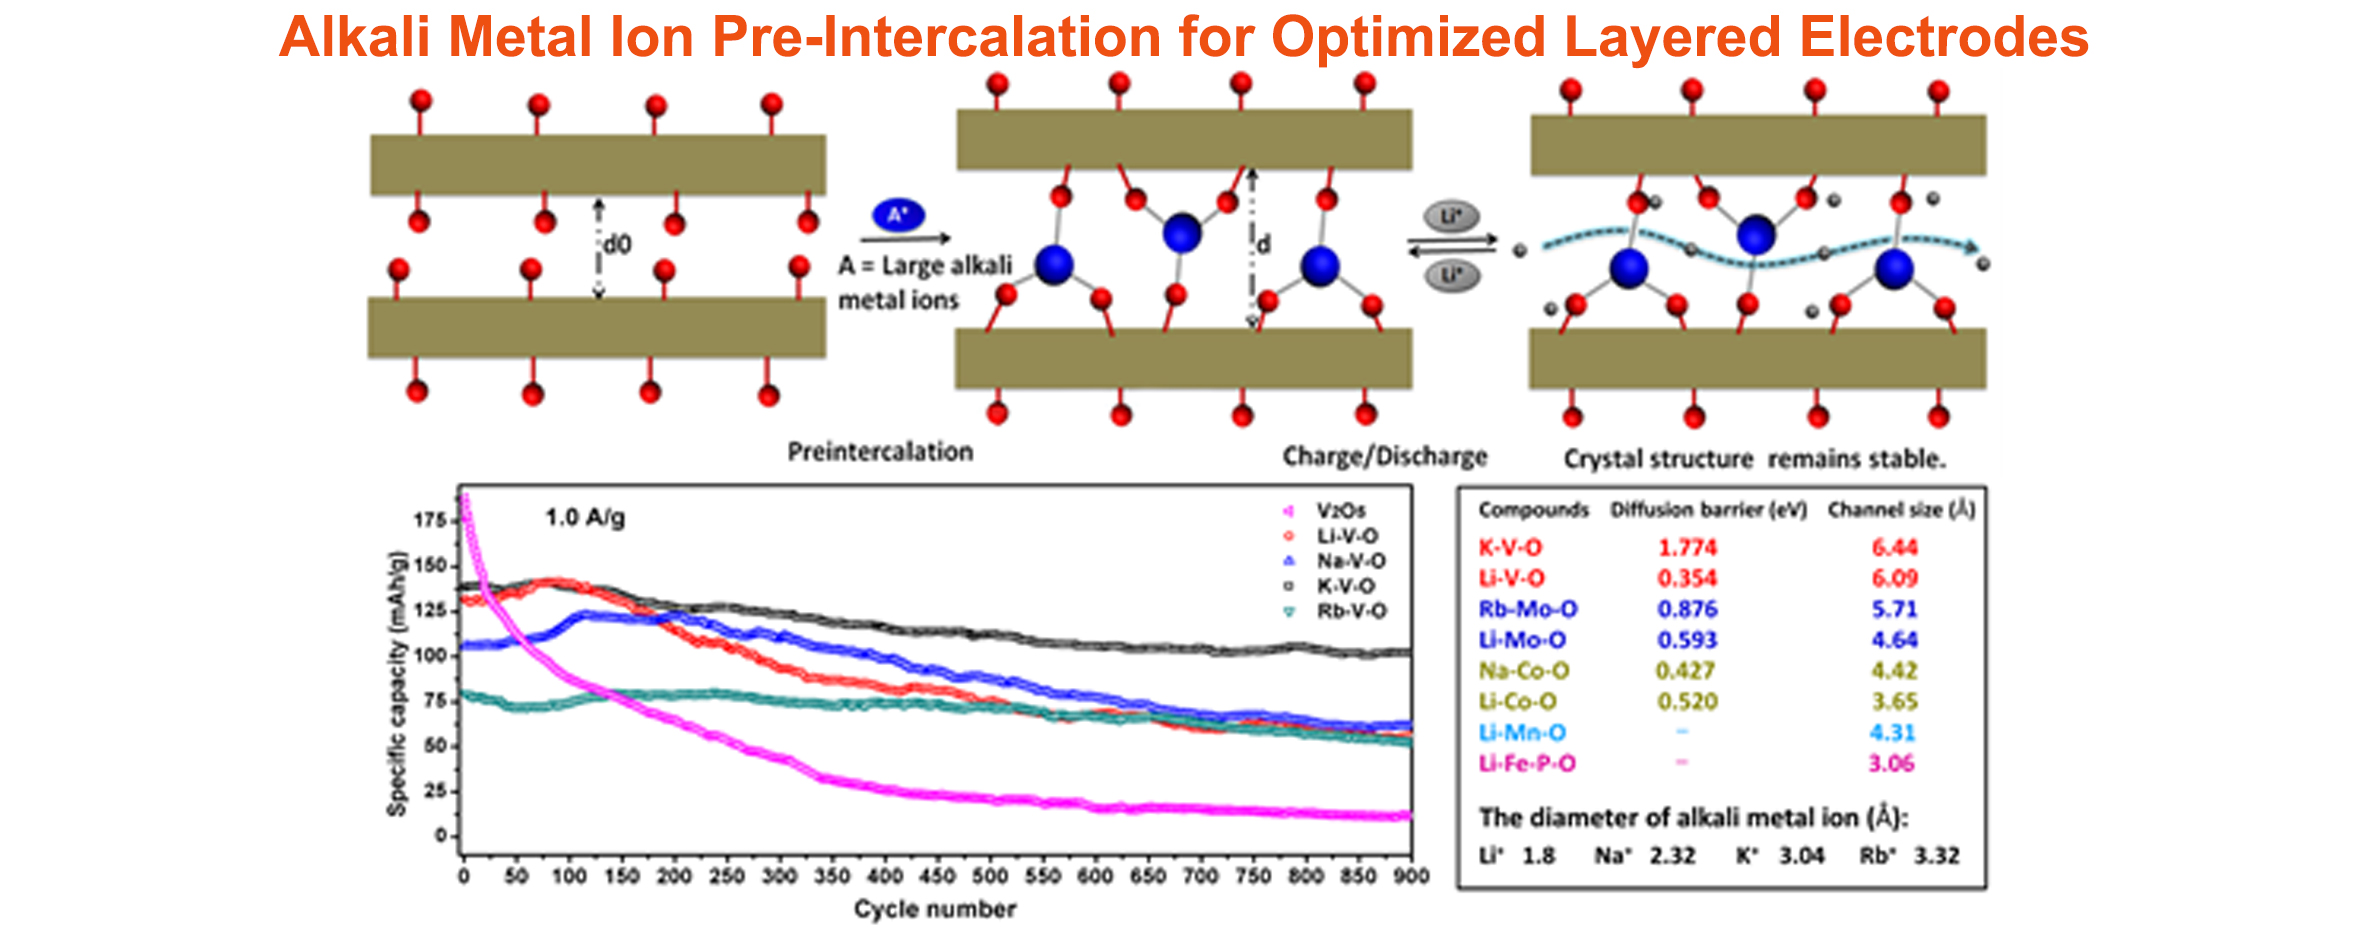 Alkali Metal Ion Pre-Intercalation for optimized layered electrodes